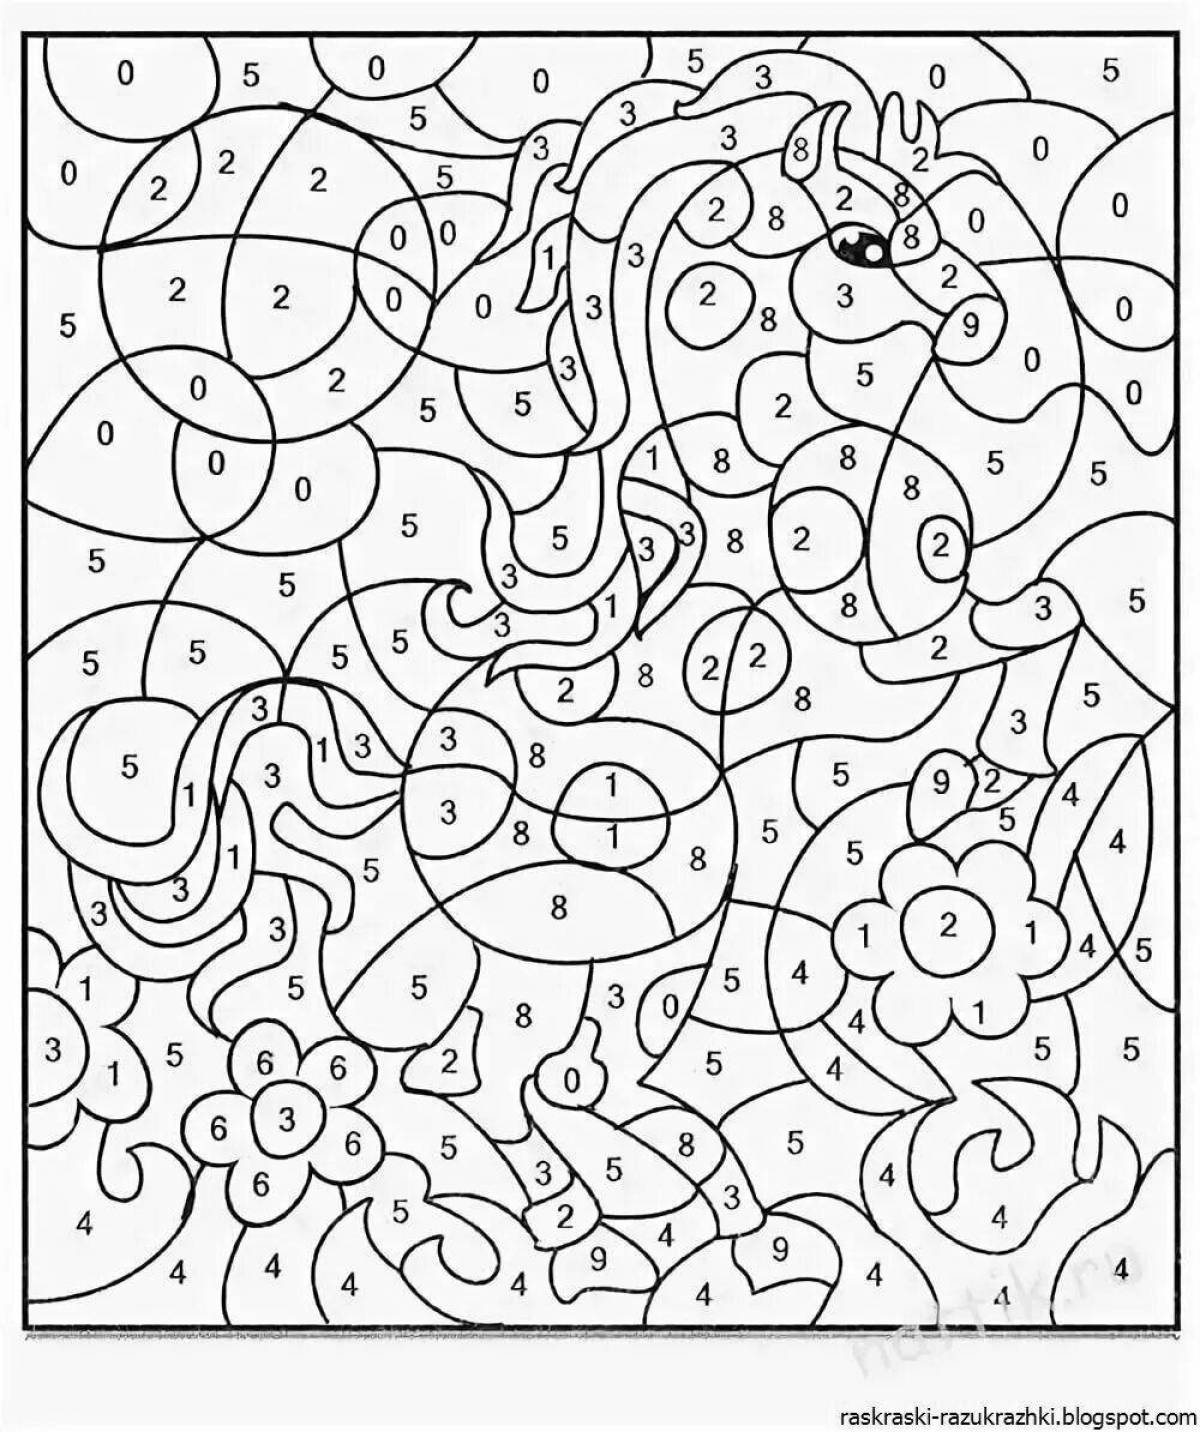 Attractive 6 year old coloring book by numbers